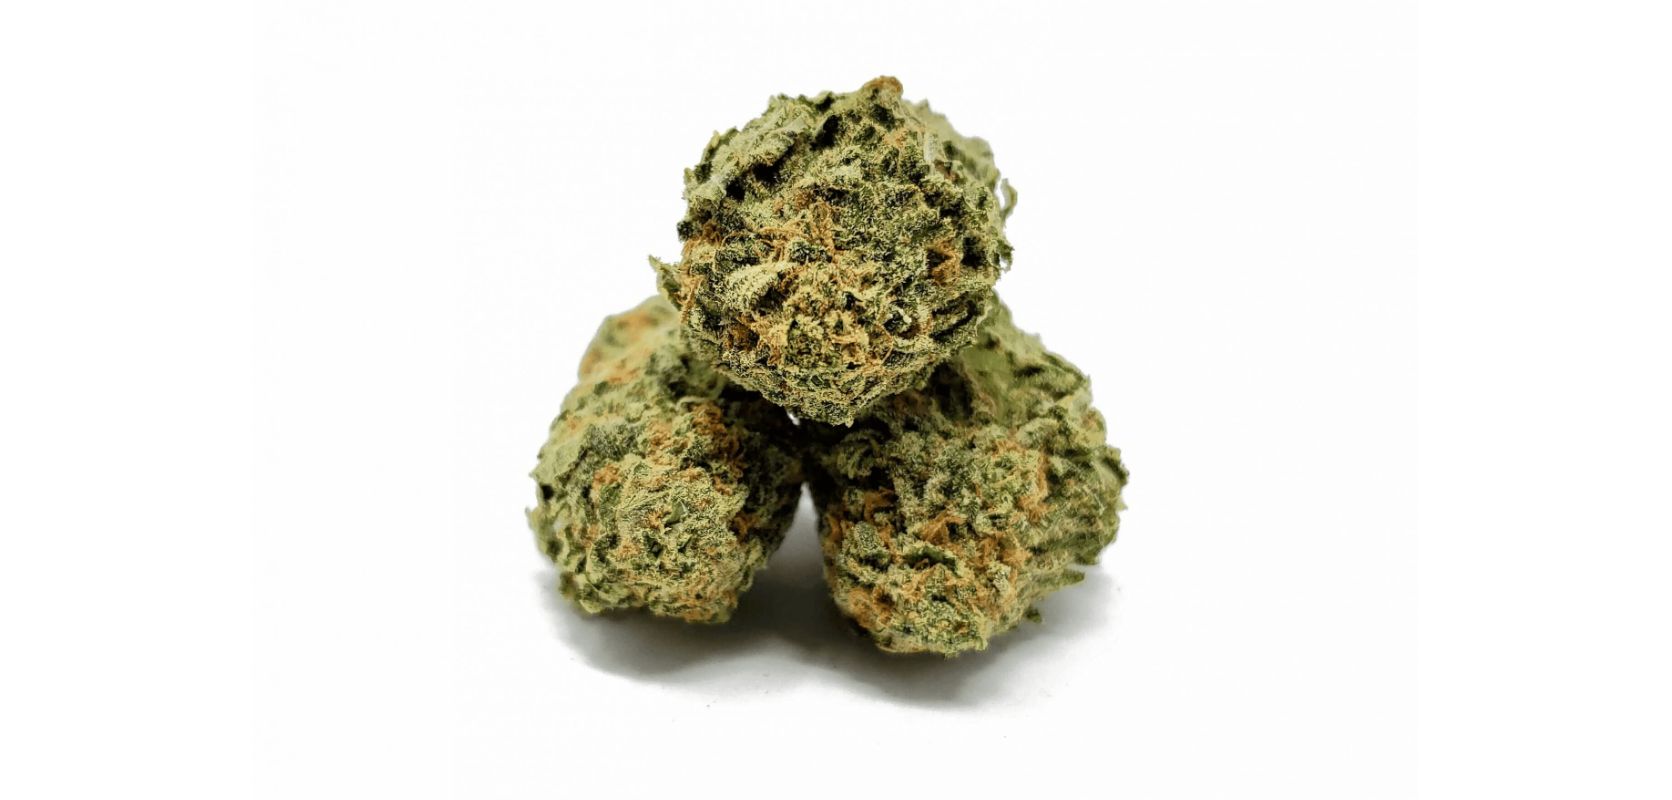 It's a good idea to talk to a doctor or ask experts at weed store if you're thinking about using MK Ultra weed strain for health reasons. They can give you personalized advice based on your needs.